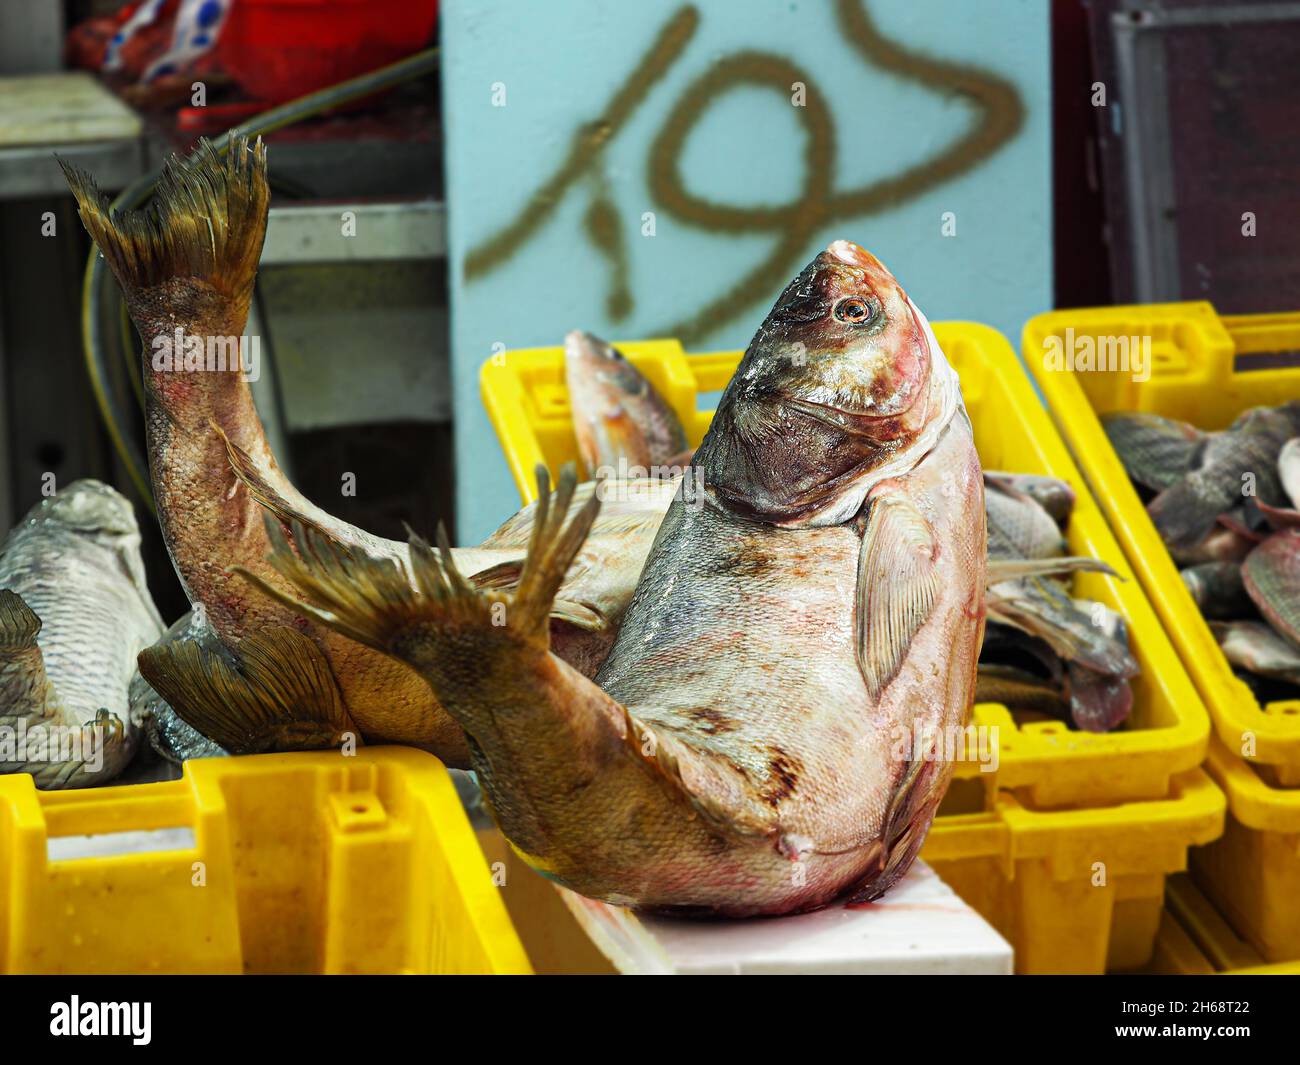 Big fish at the eastern market in Israel in the city of Akko. Stock Photo